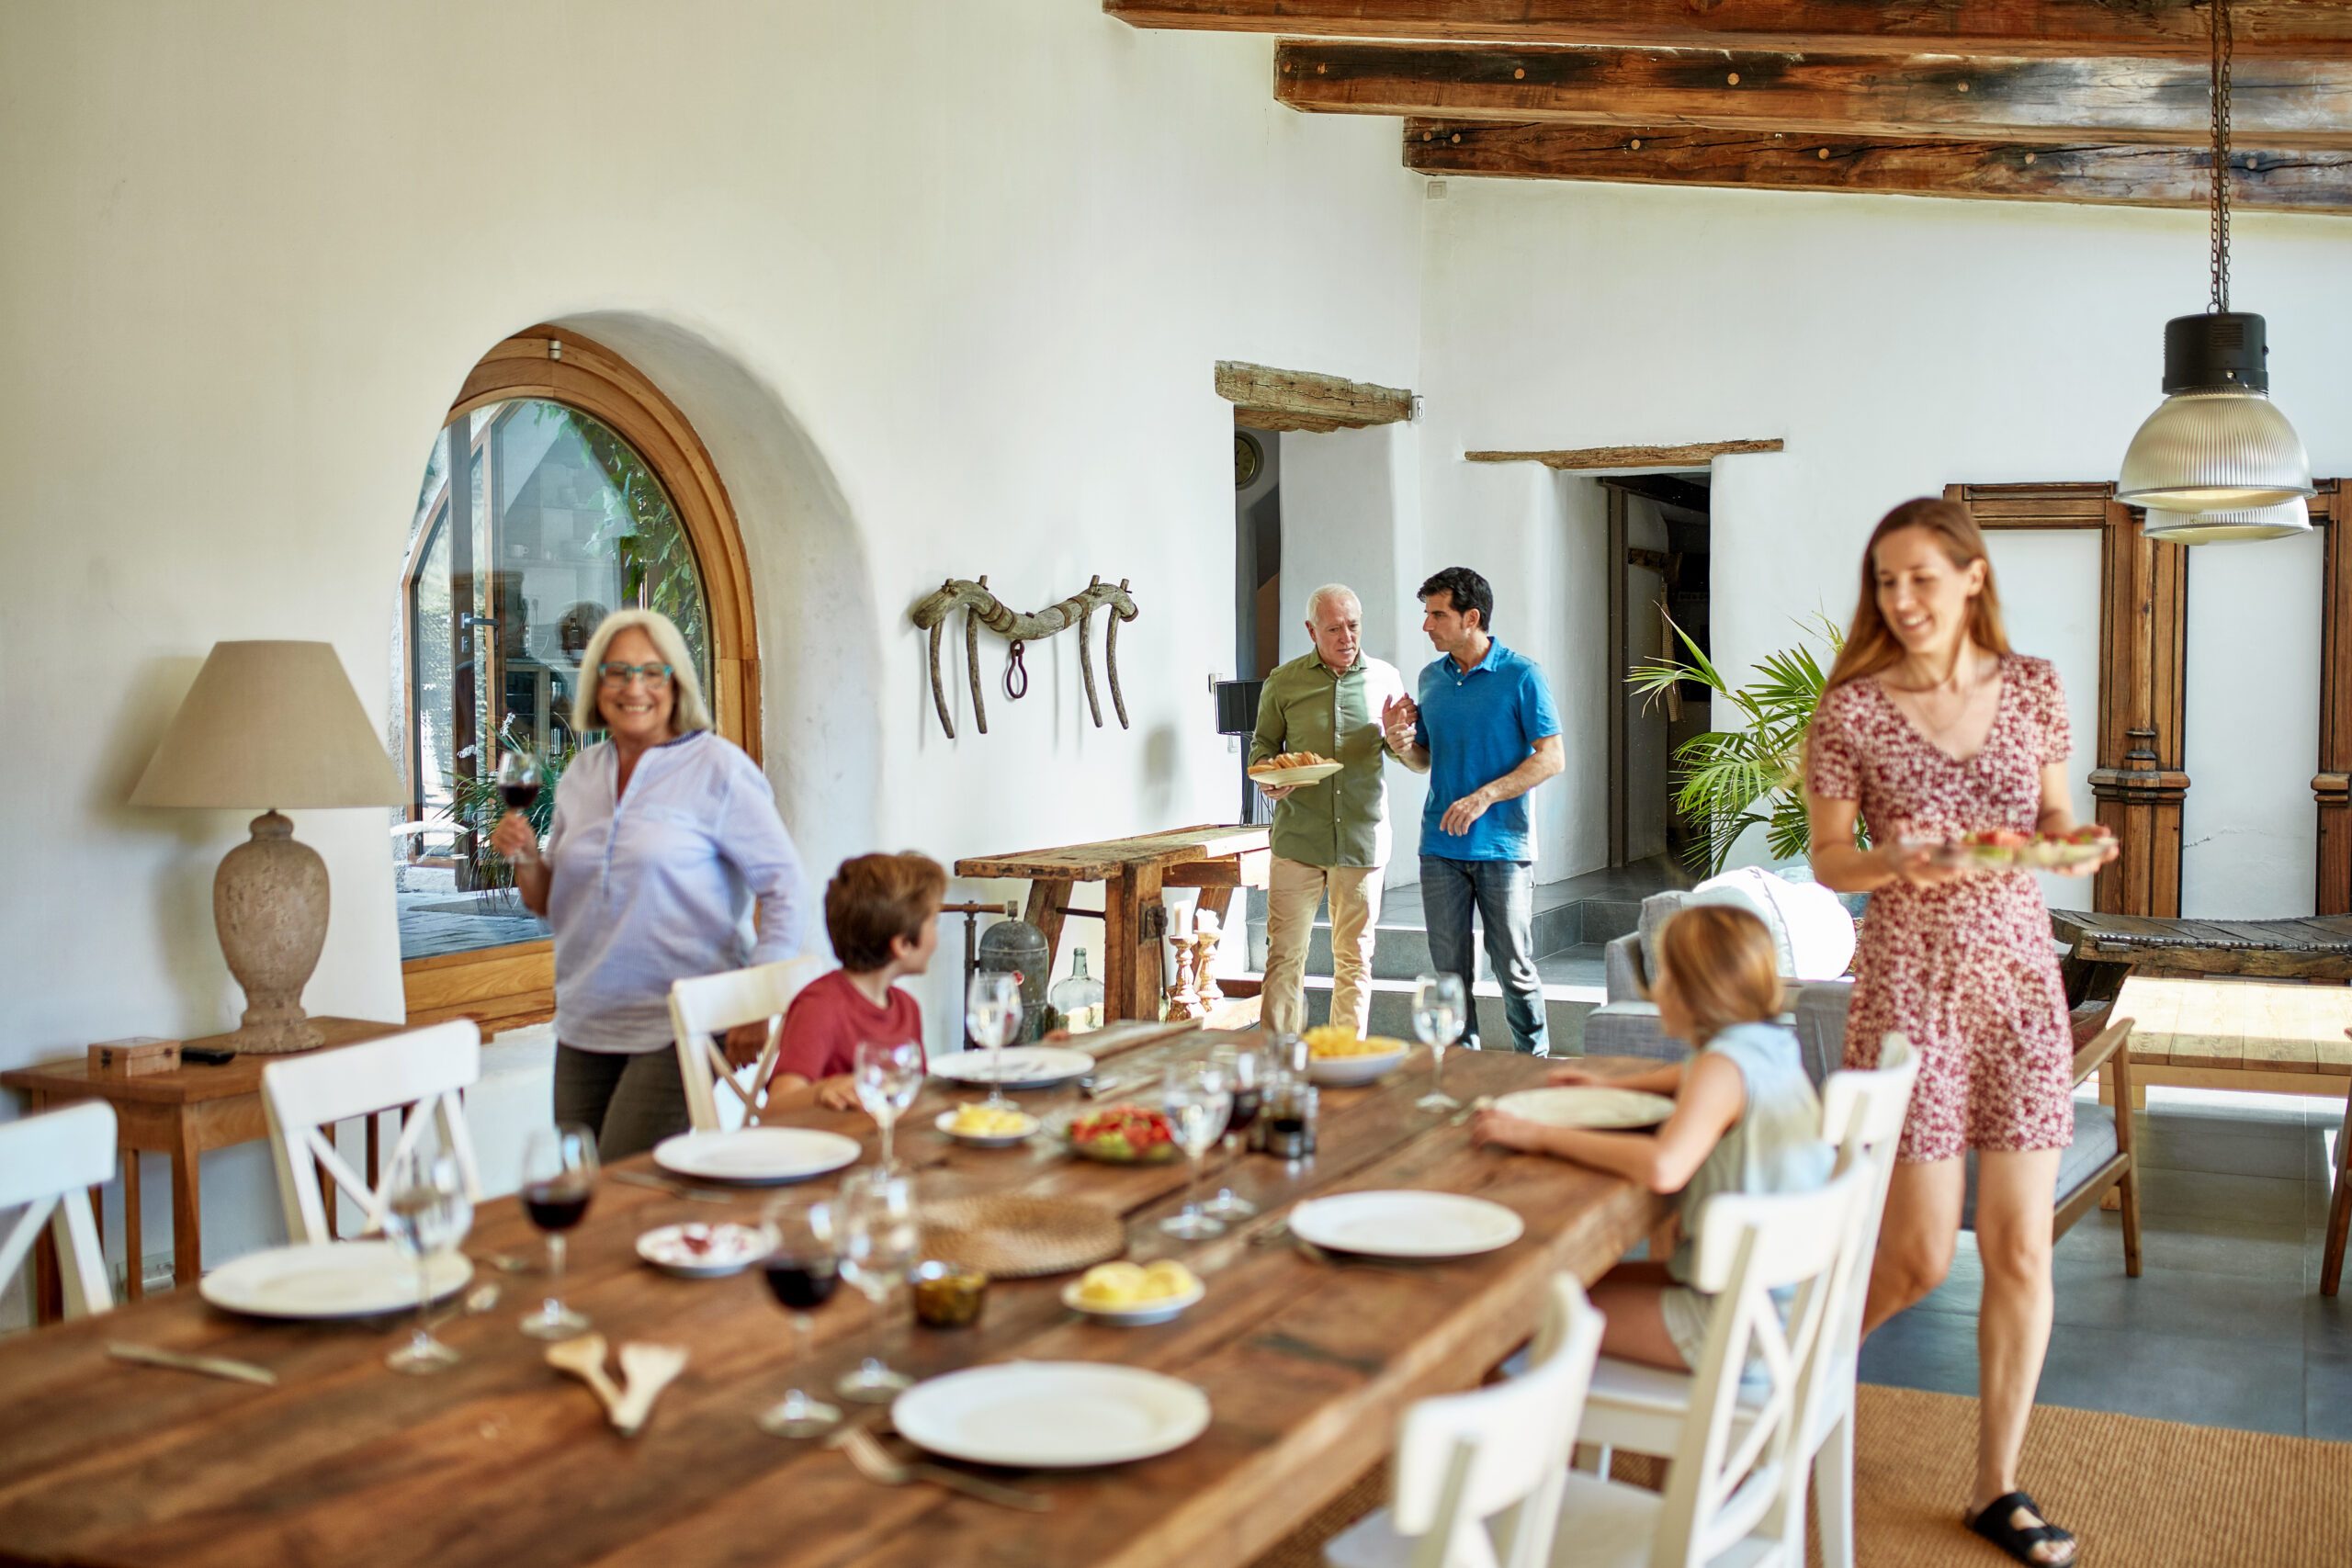 Adults approaching Spanish-style farmhouse dining table with food and drink as seated children wait for start of lunch.